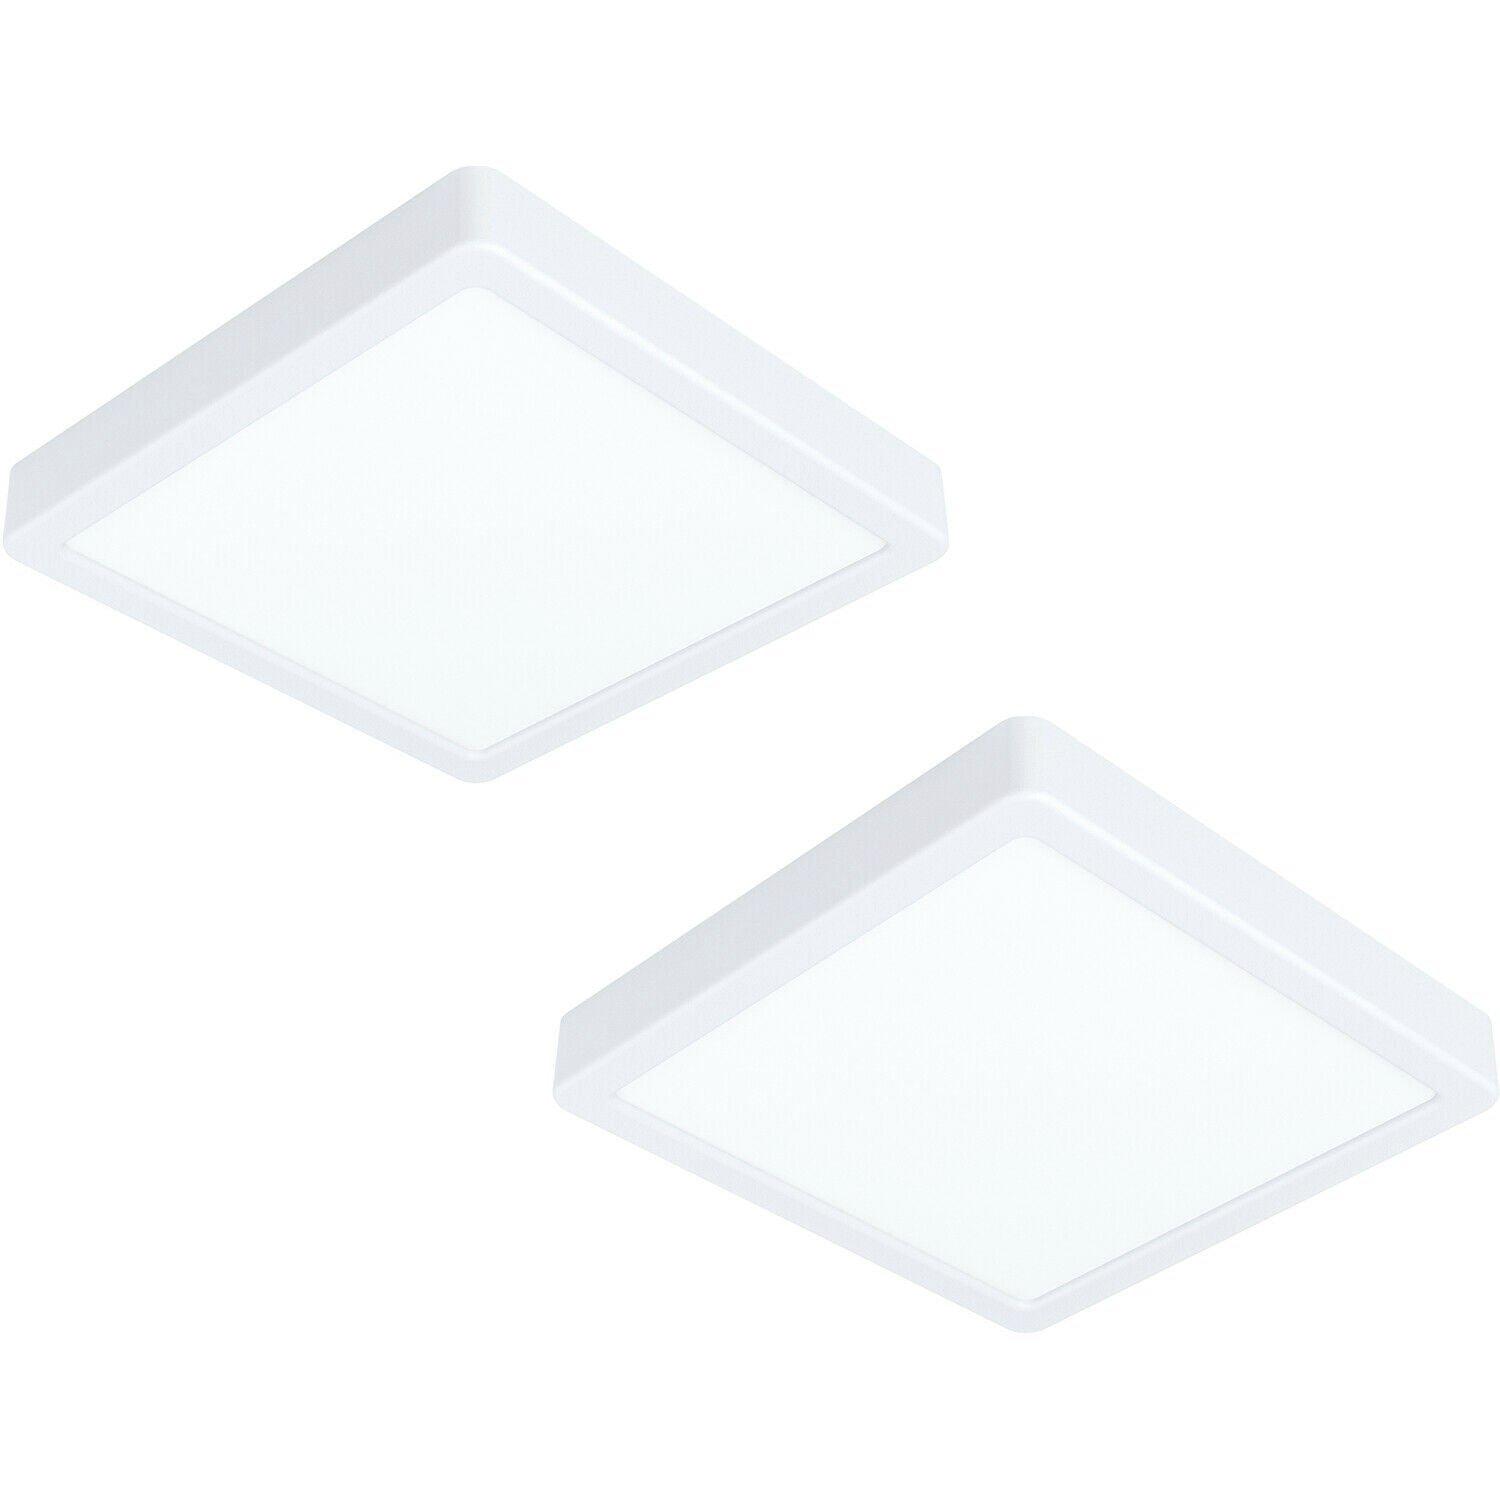 2 PACK Wall / Ceiling Light White 210mm Square Surface Mounted 16.5W LED 4000K